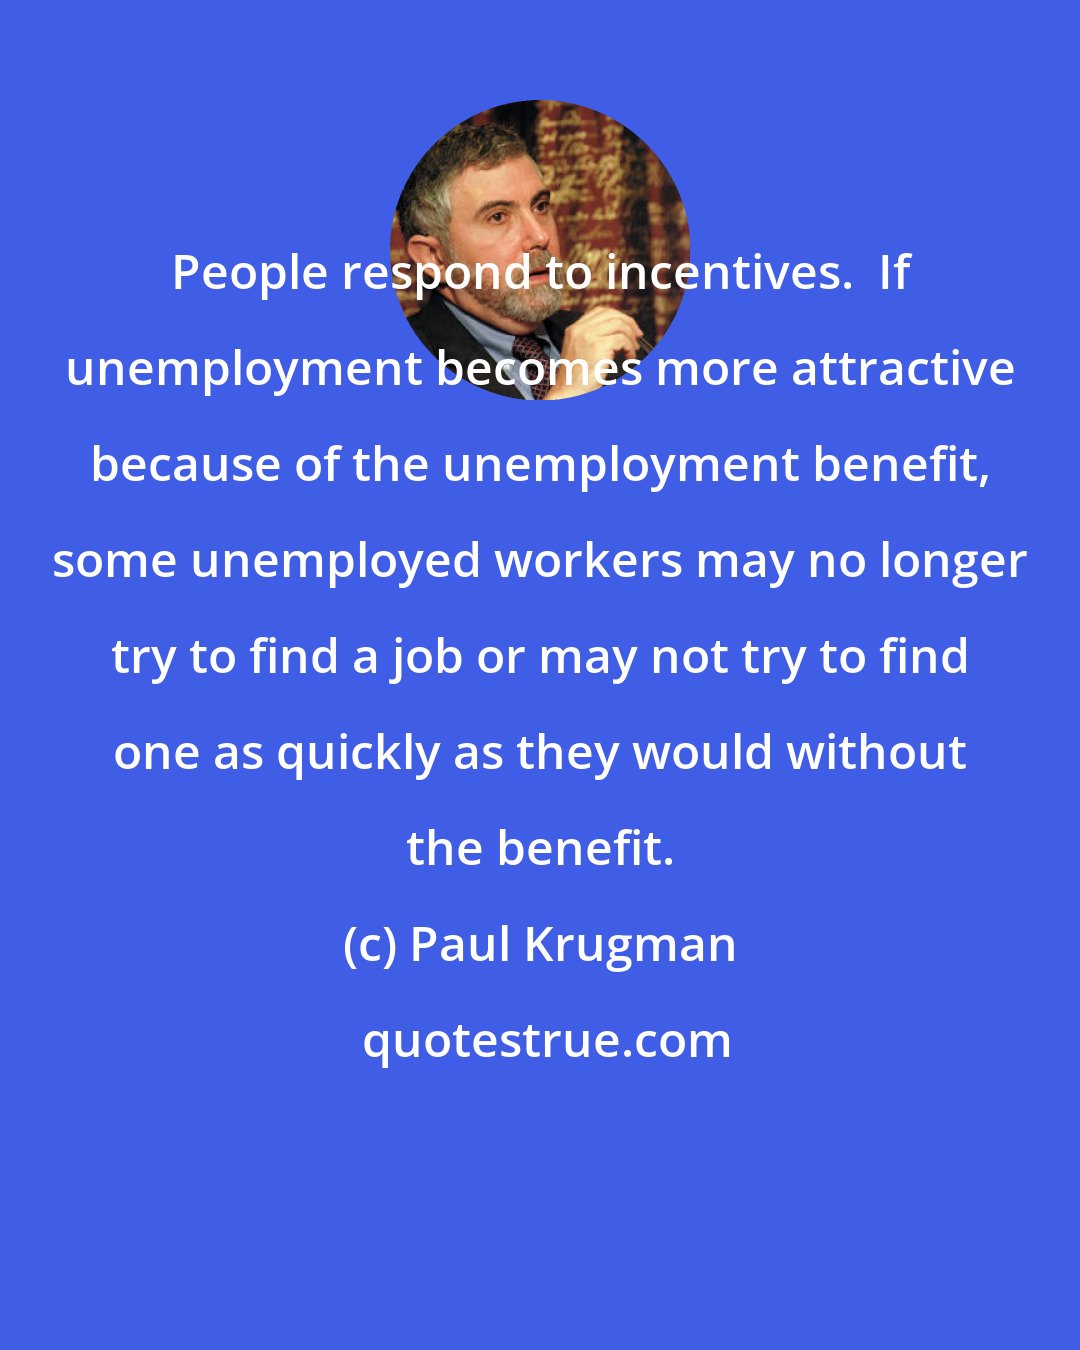 Paul Krugman: People respond to incentives.  If unemployment becomes more attractive because of the unemployment benefit, some unemployed workers may no longer try to find a job or may not try to find one as quickly as they would without the benefit.